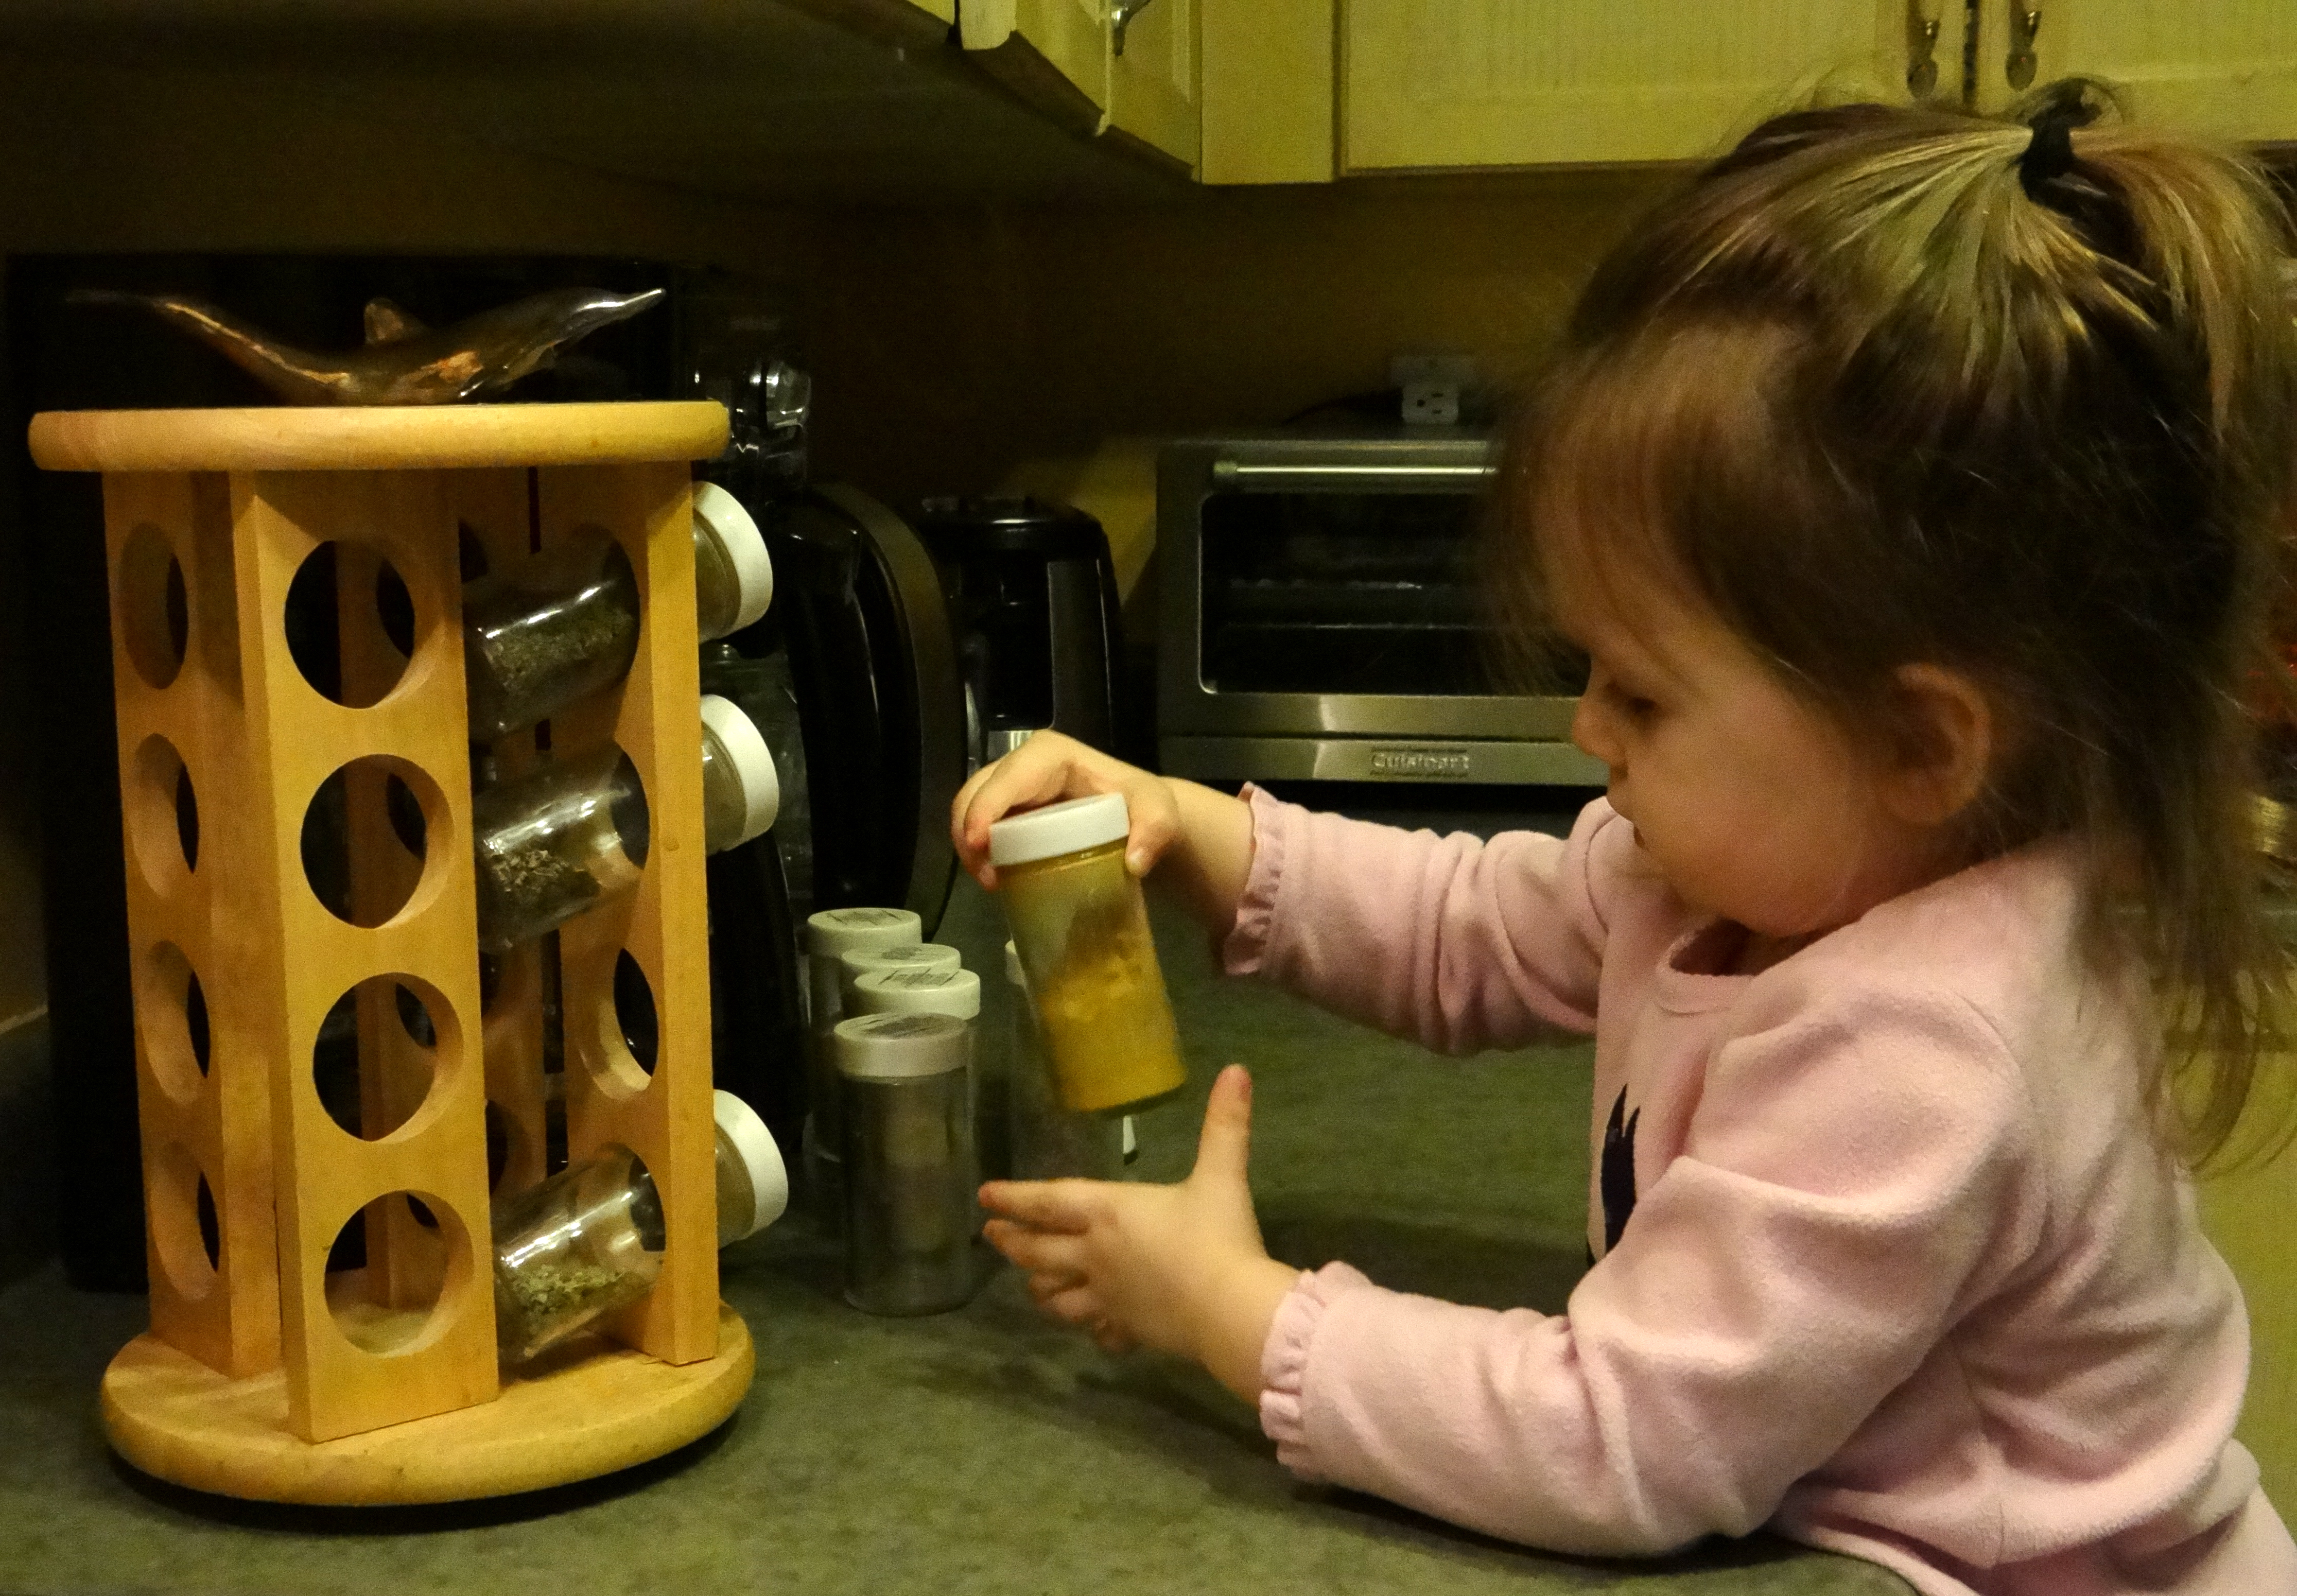 Toddler playing with a spice rack